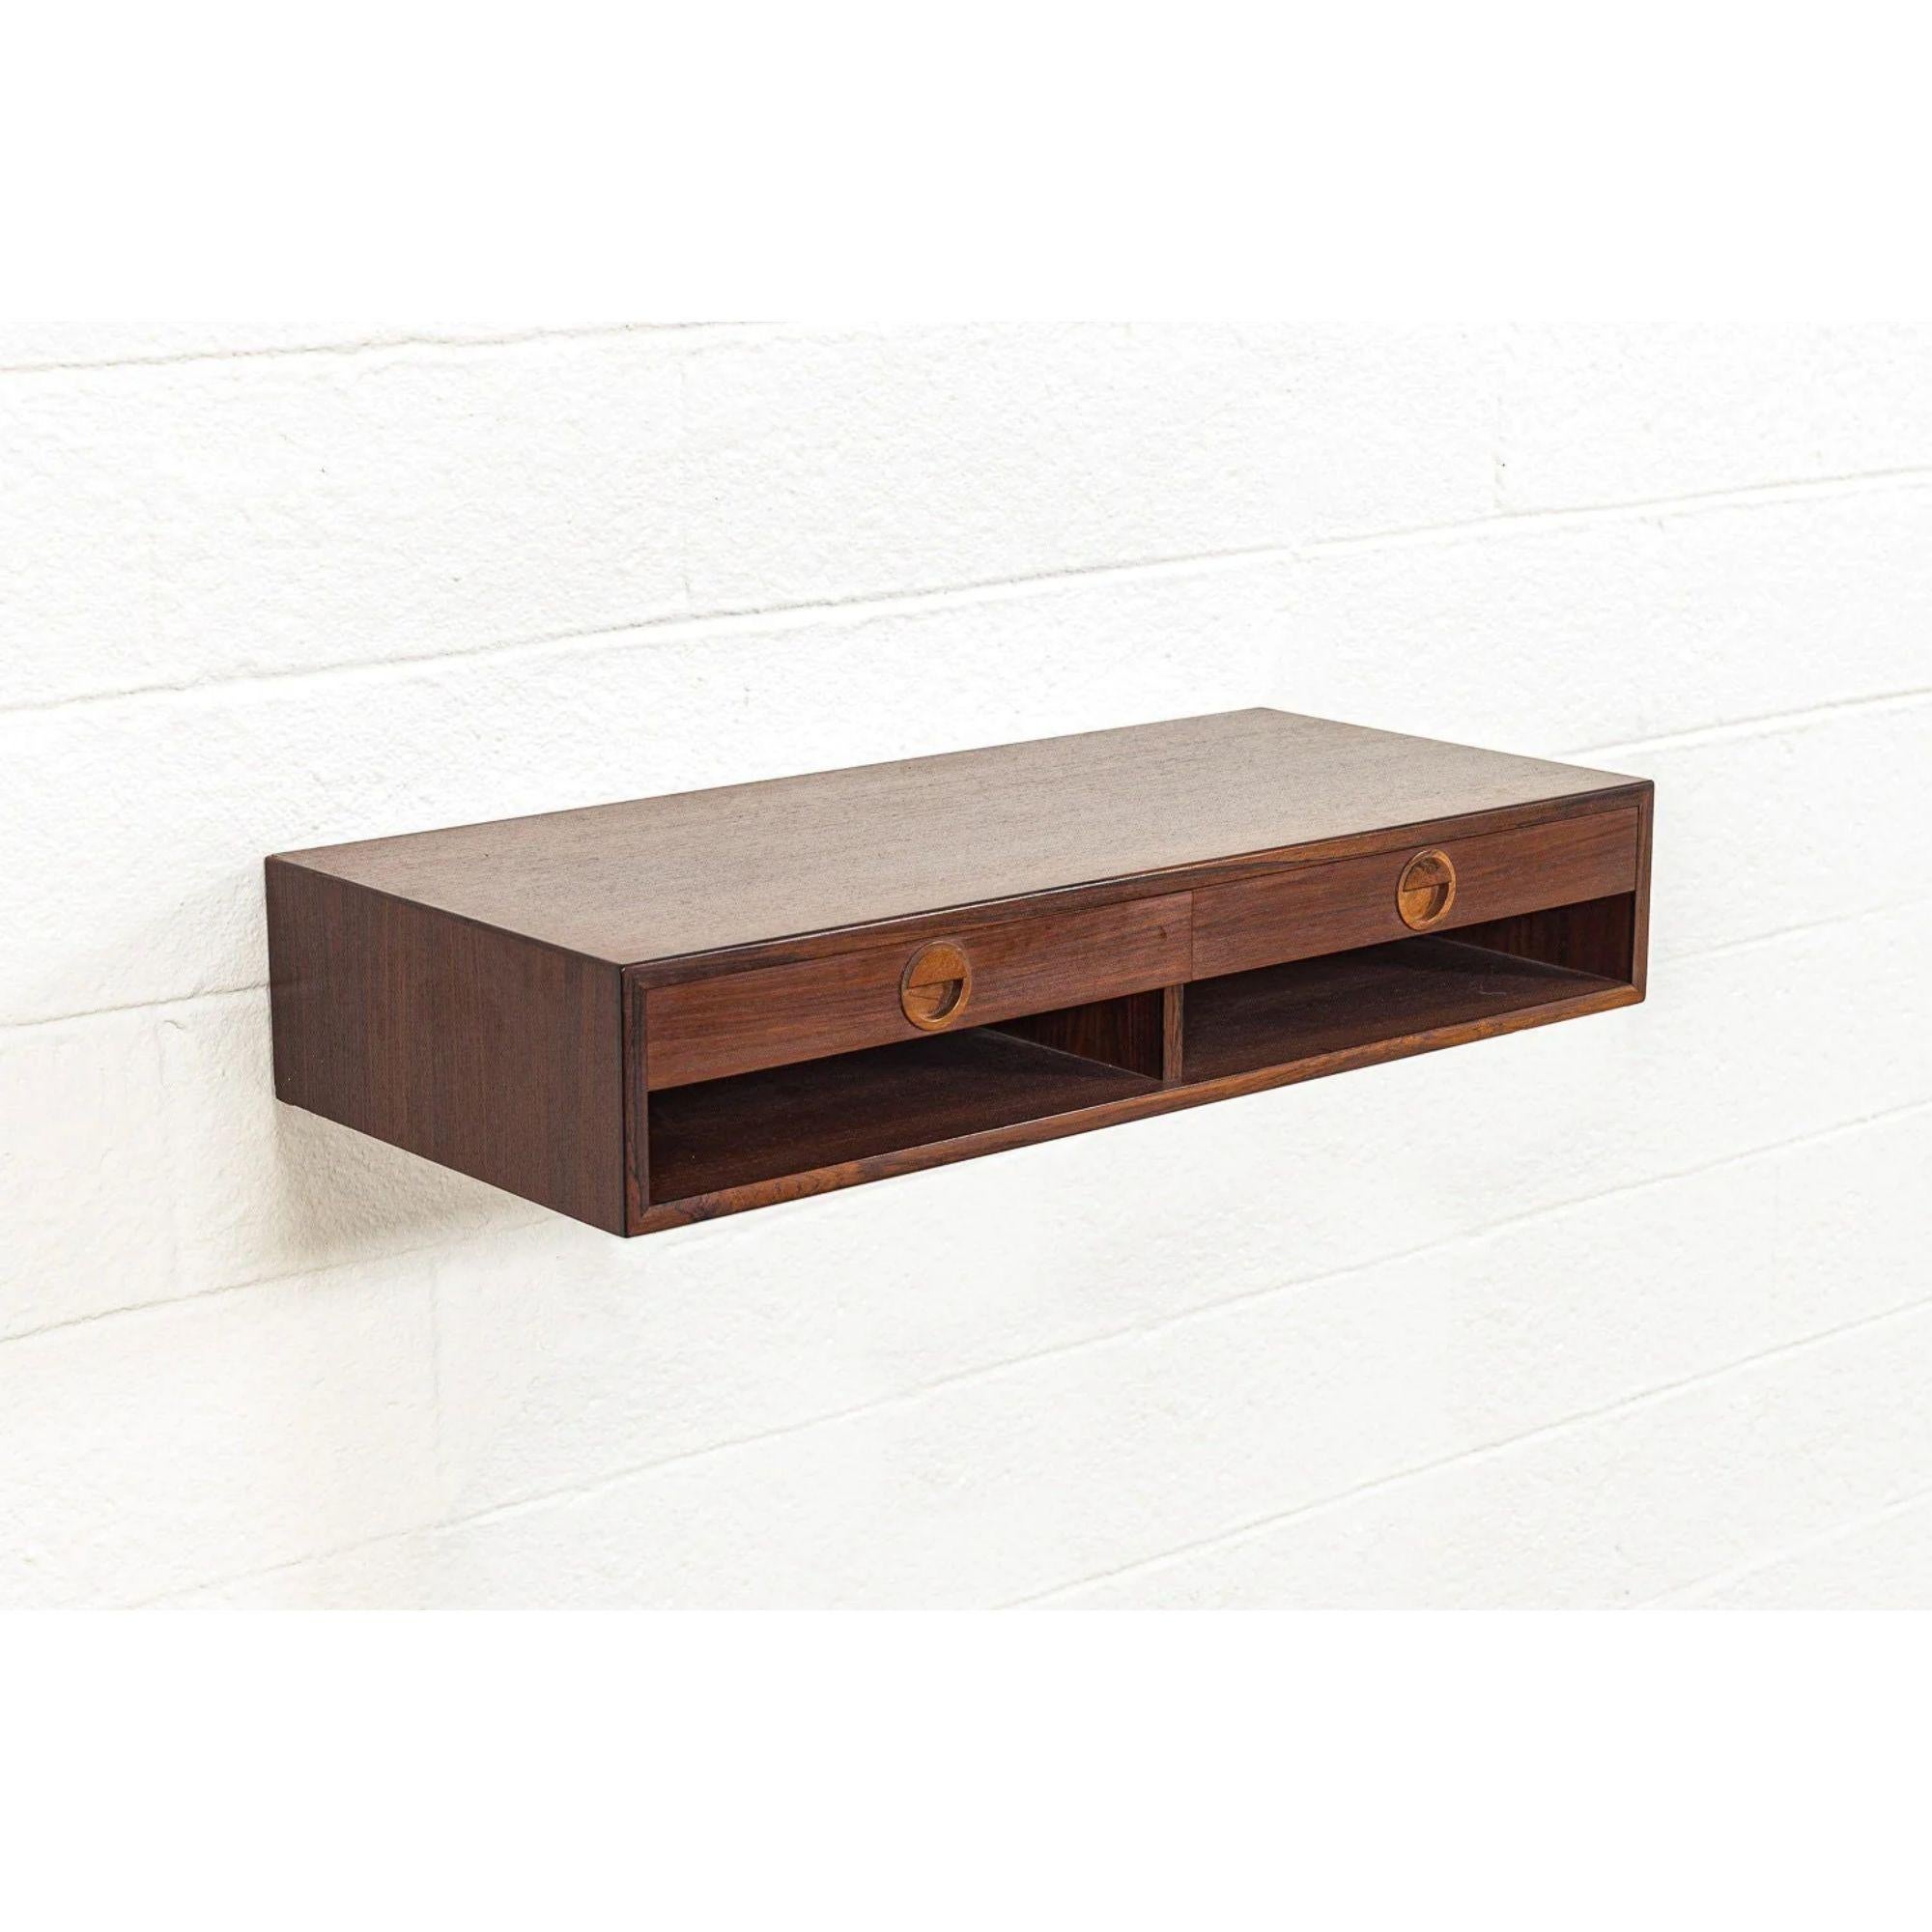 This vintage Mid-Century Modern Hansen & Guldborg wall-mounted floating shelf made in Denmark circa 1965 has a Classic Scandinavian Modern design with clean, Minimalist lines. Well-built from rosewood, the cabinet features a lower cubby shelf and